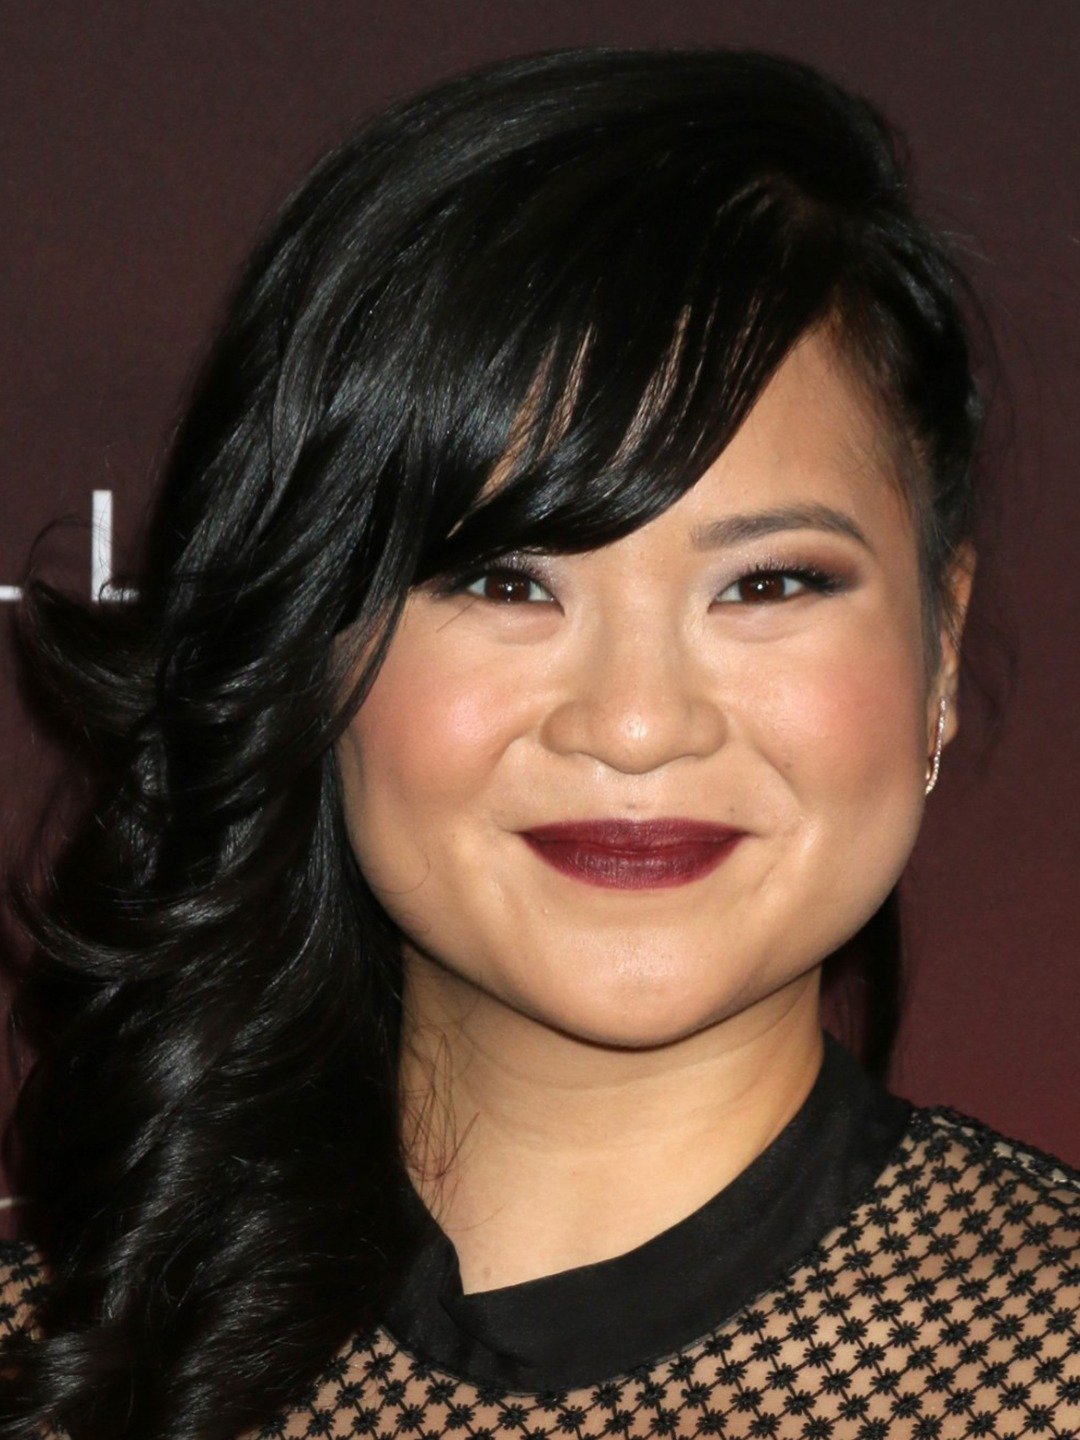 How tall is Kelly Marie Tran? 